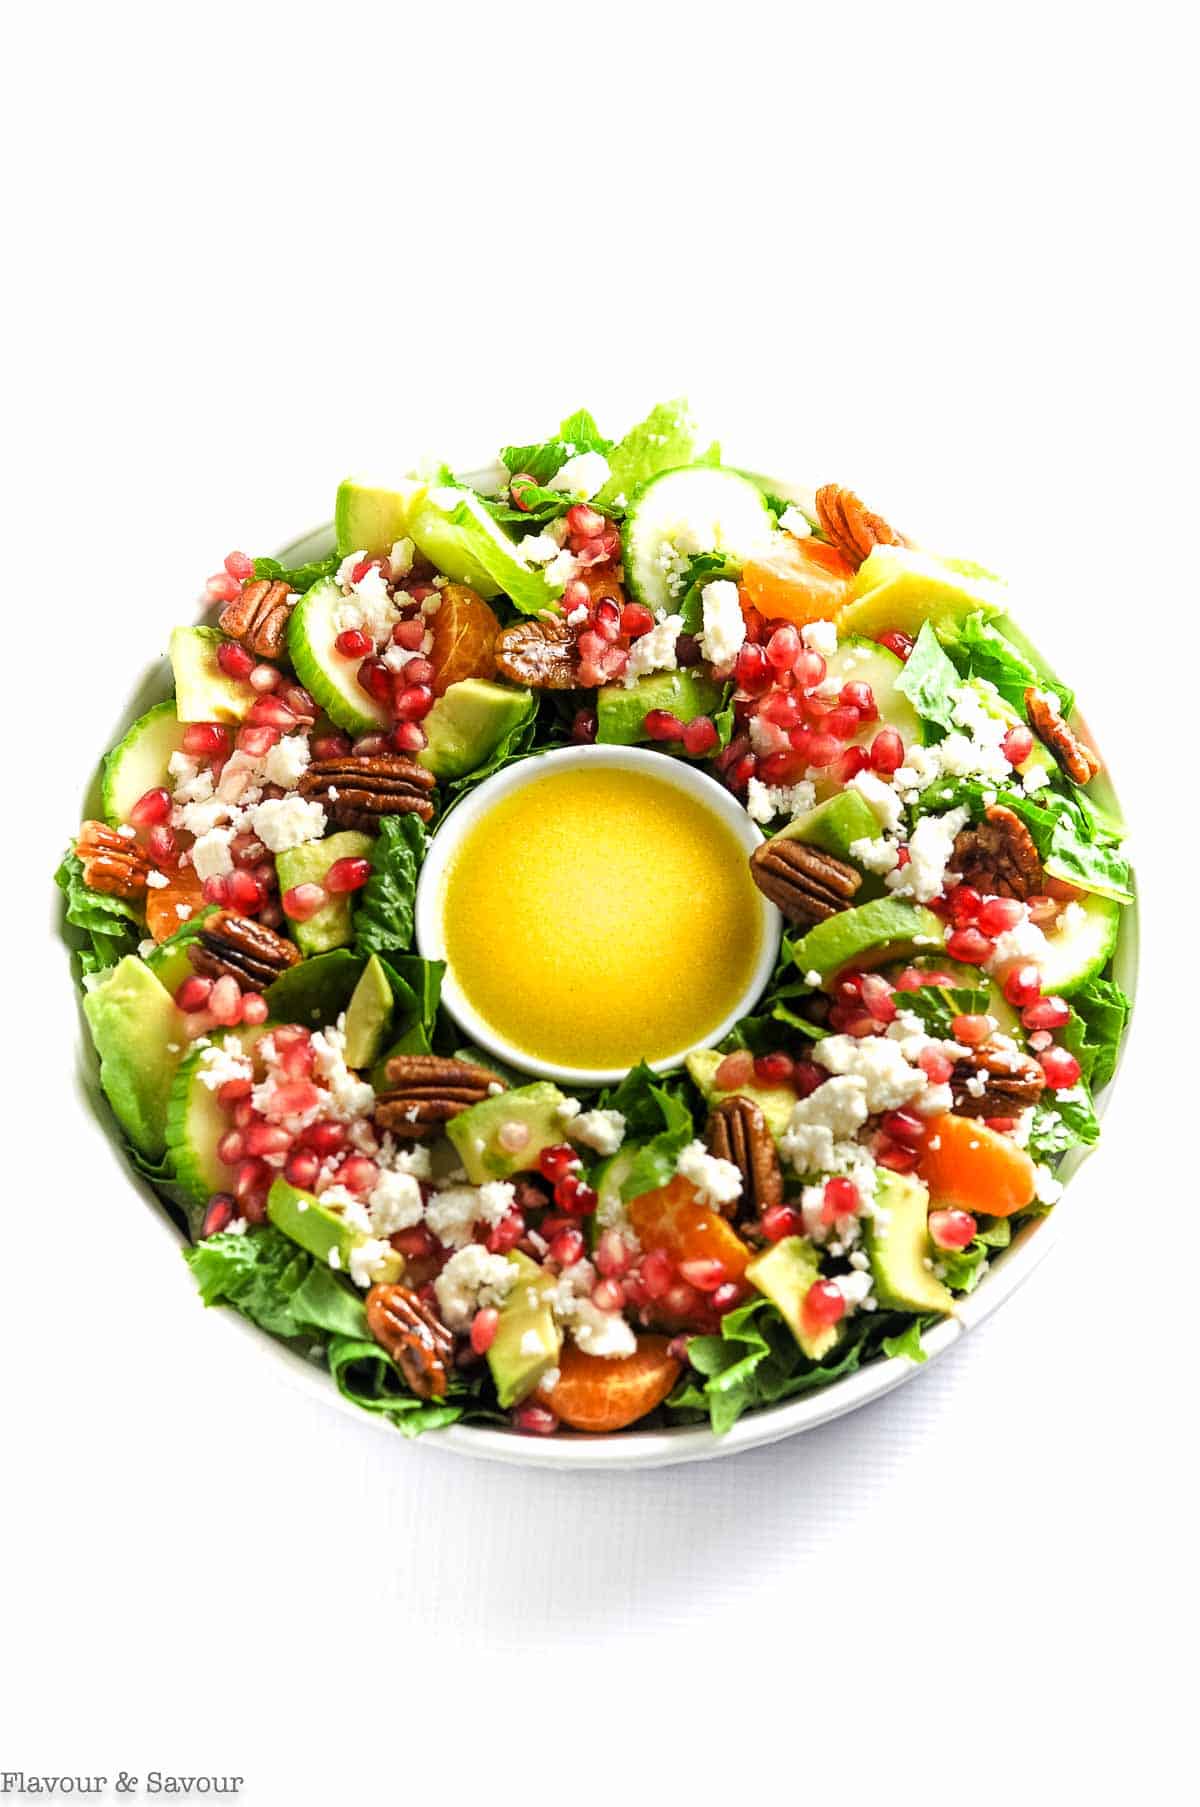 Overhead view of Christmas Wreath Salad with a bowl of dressing in the middle.